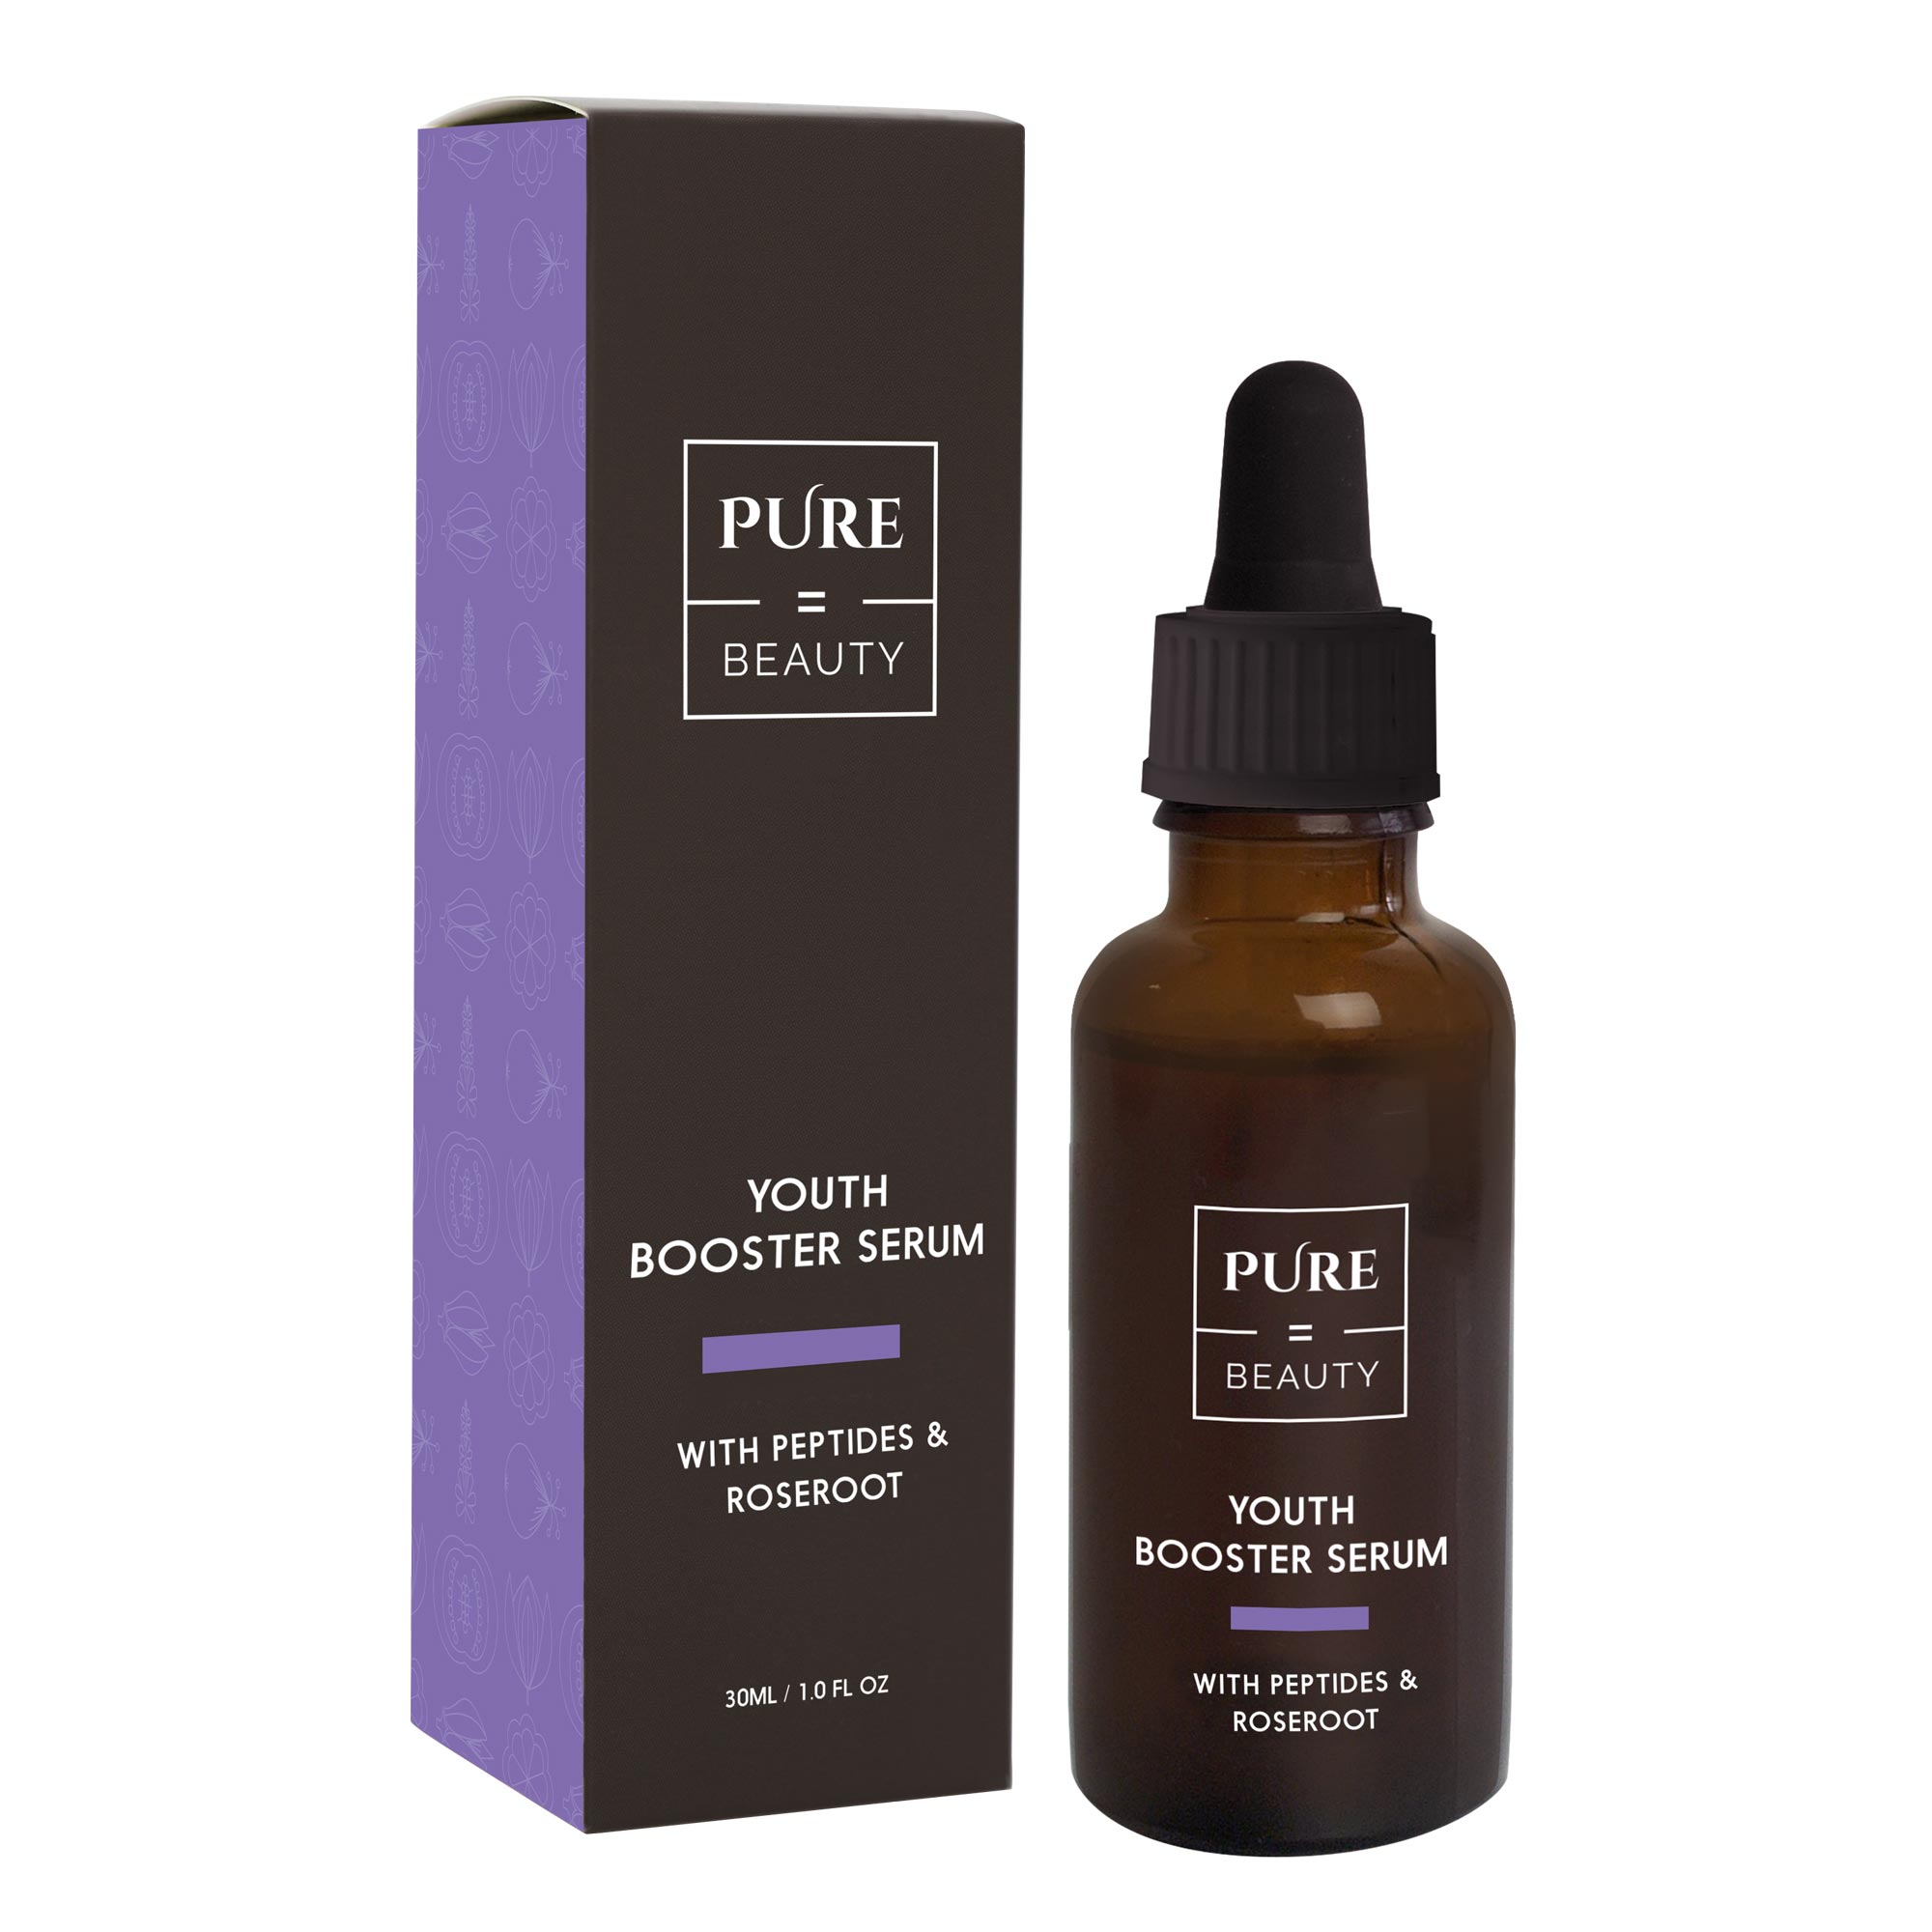 Youth Booster Serum : Pure=Beauty